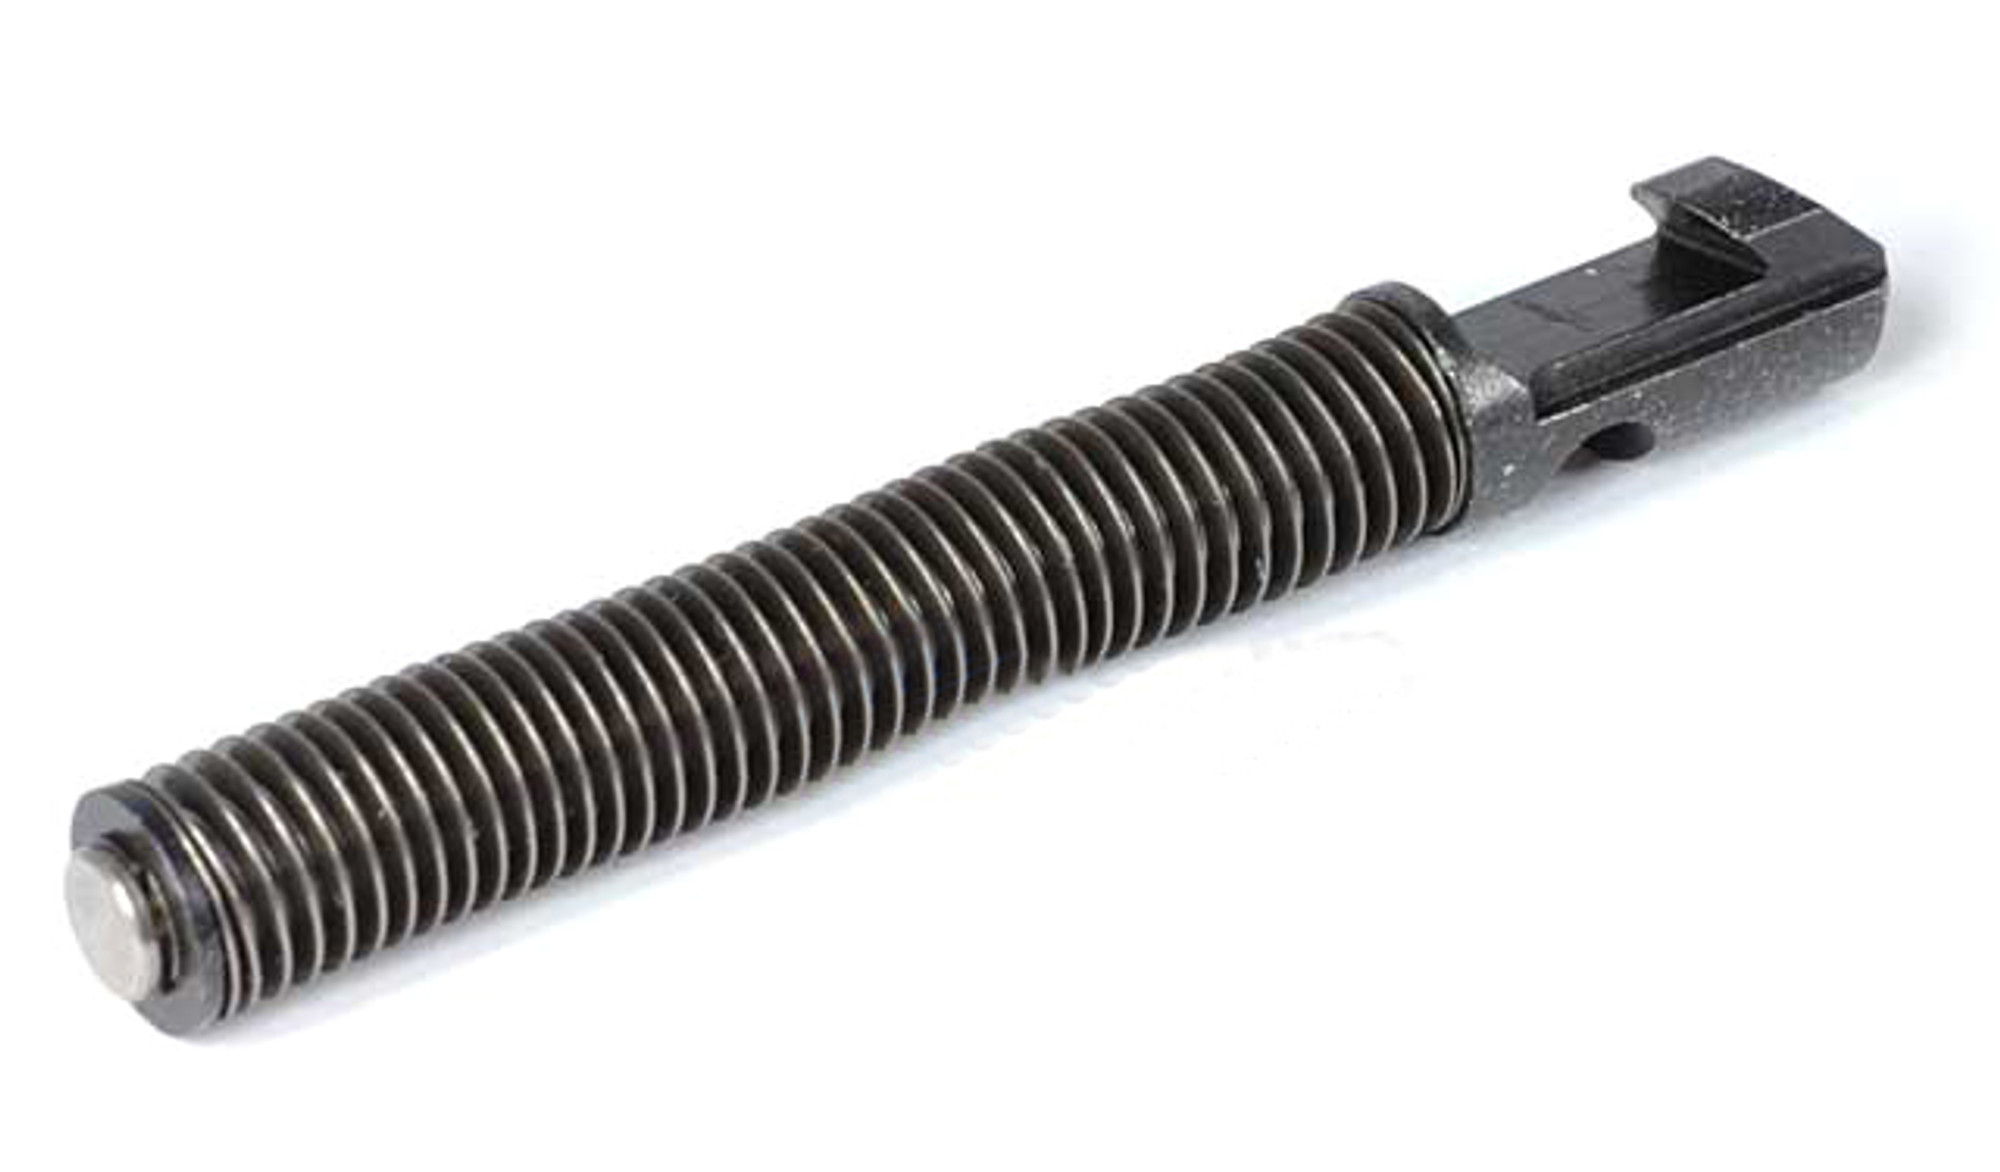 KWA GBB Parts : KPS Compact Recoil Spring Assembly.